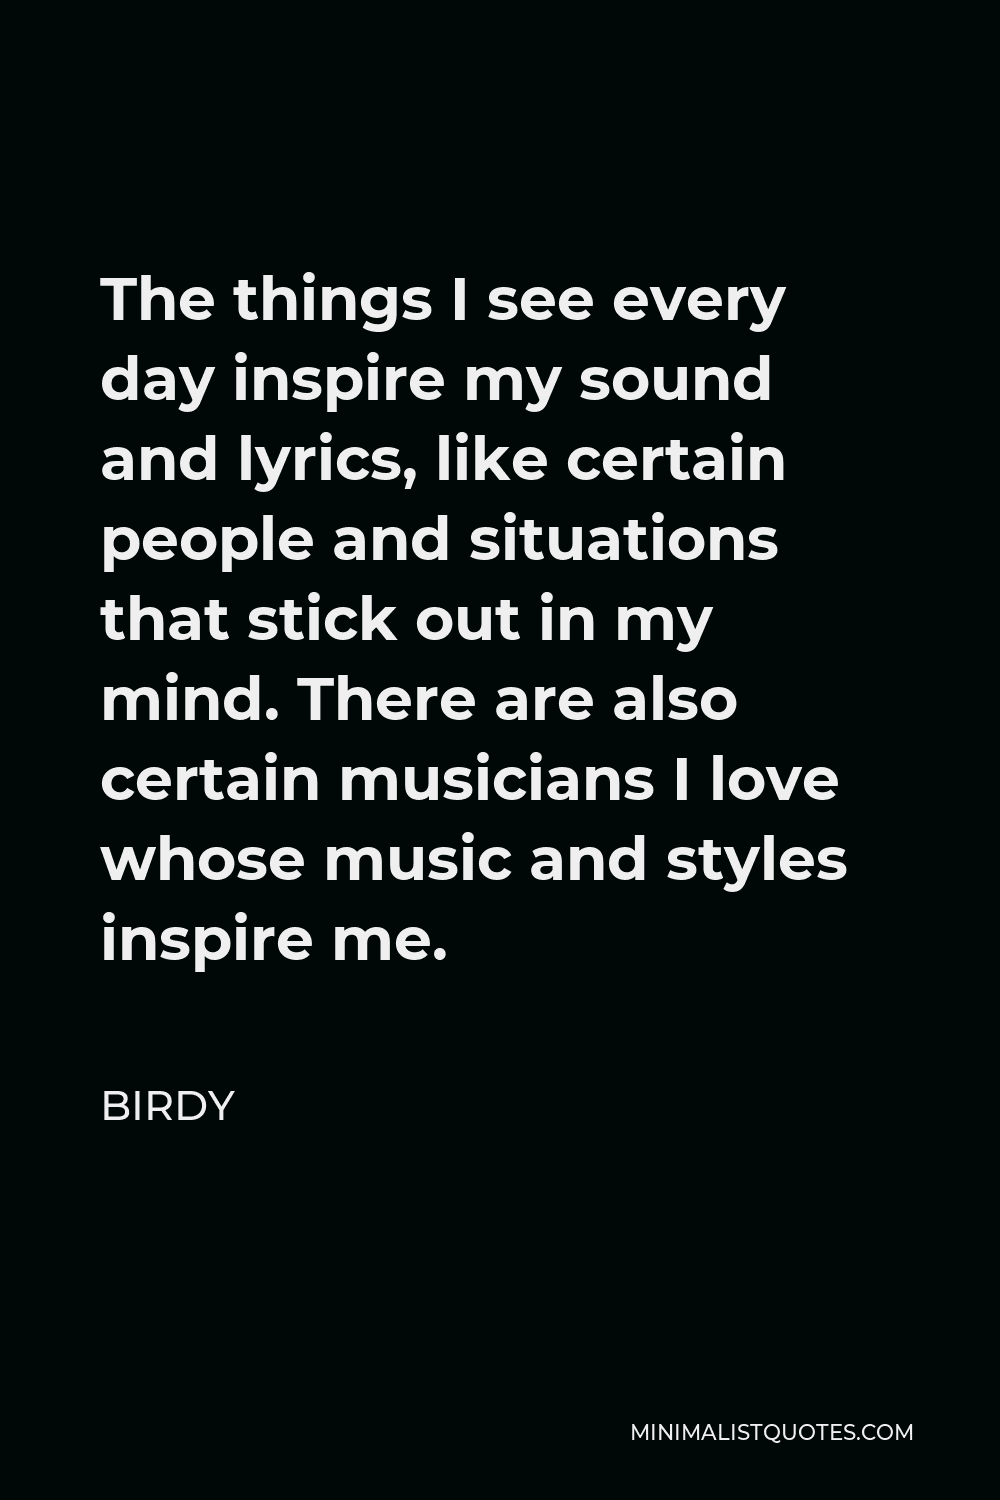 Birdy Quote - The things I see every day inspire my sound and lyrics, like certain people and situations that stick out in my mind. There are also certain musicians I love whose music and styles inspire me.